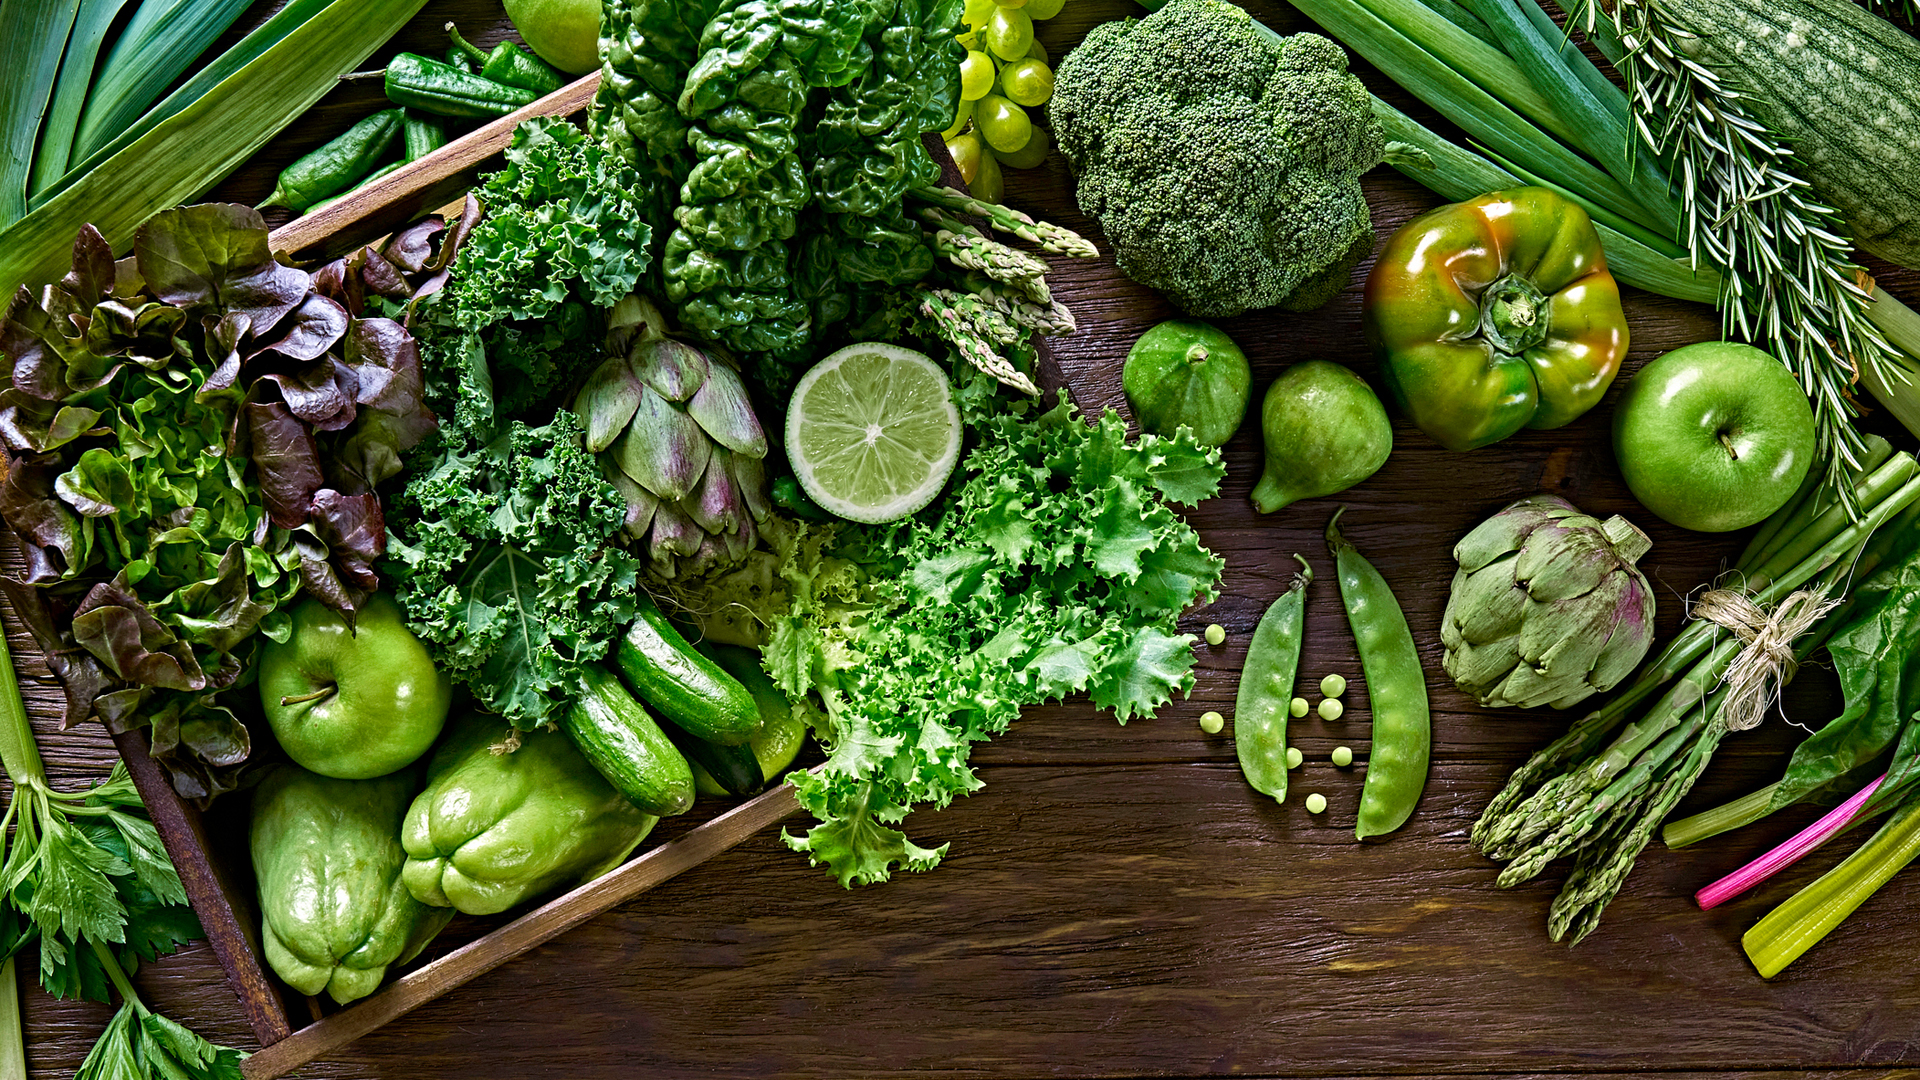 Top view background of variation of green vegetables for detox and alkaline diet